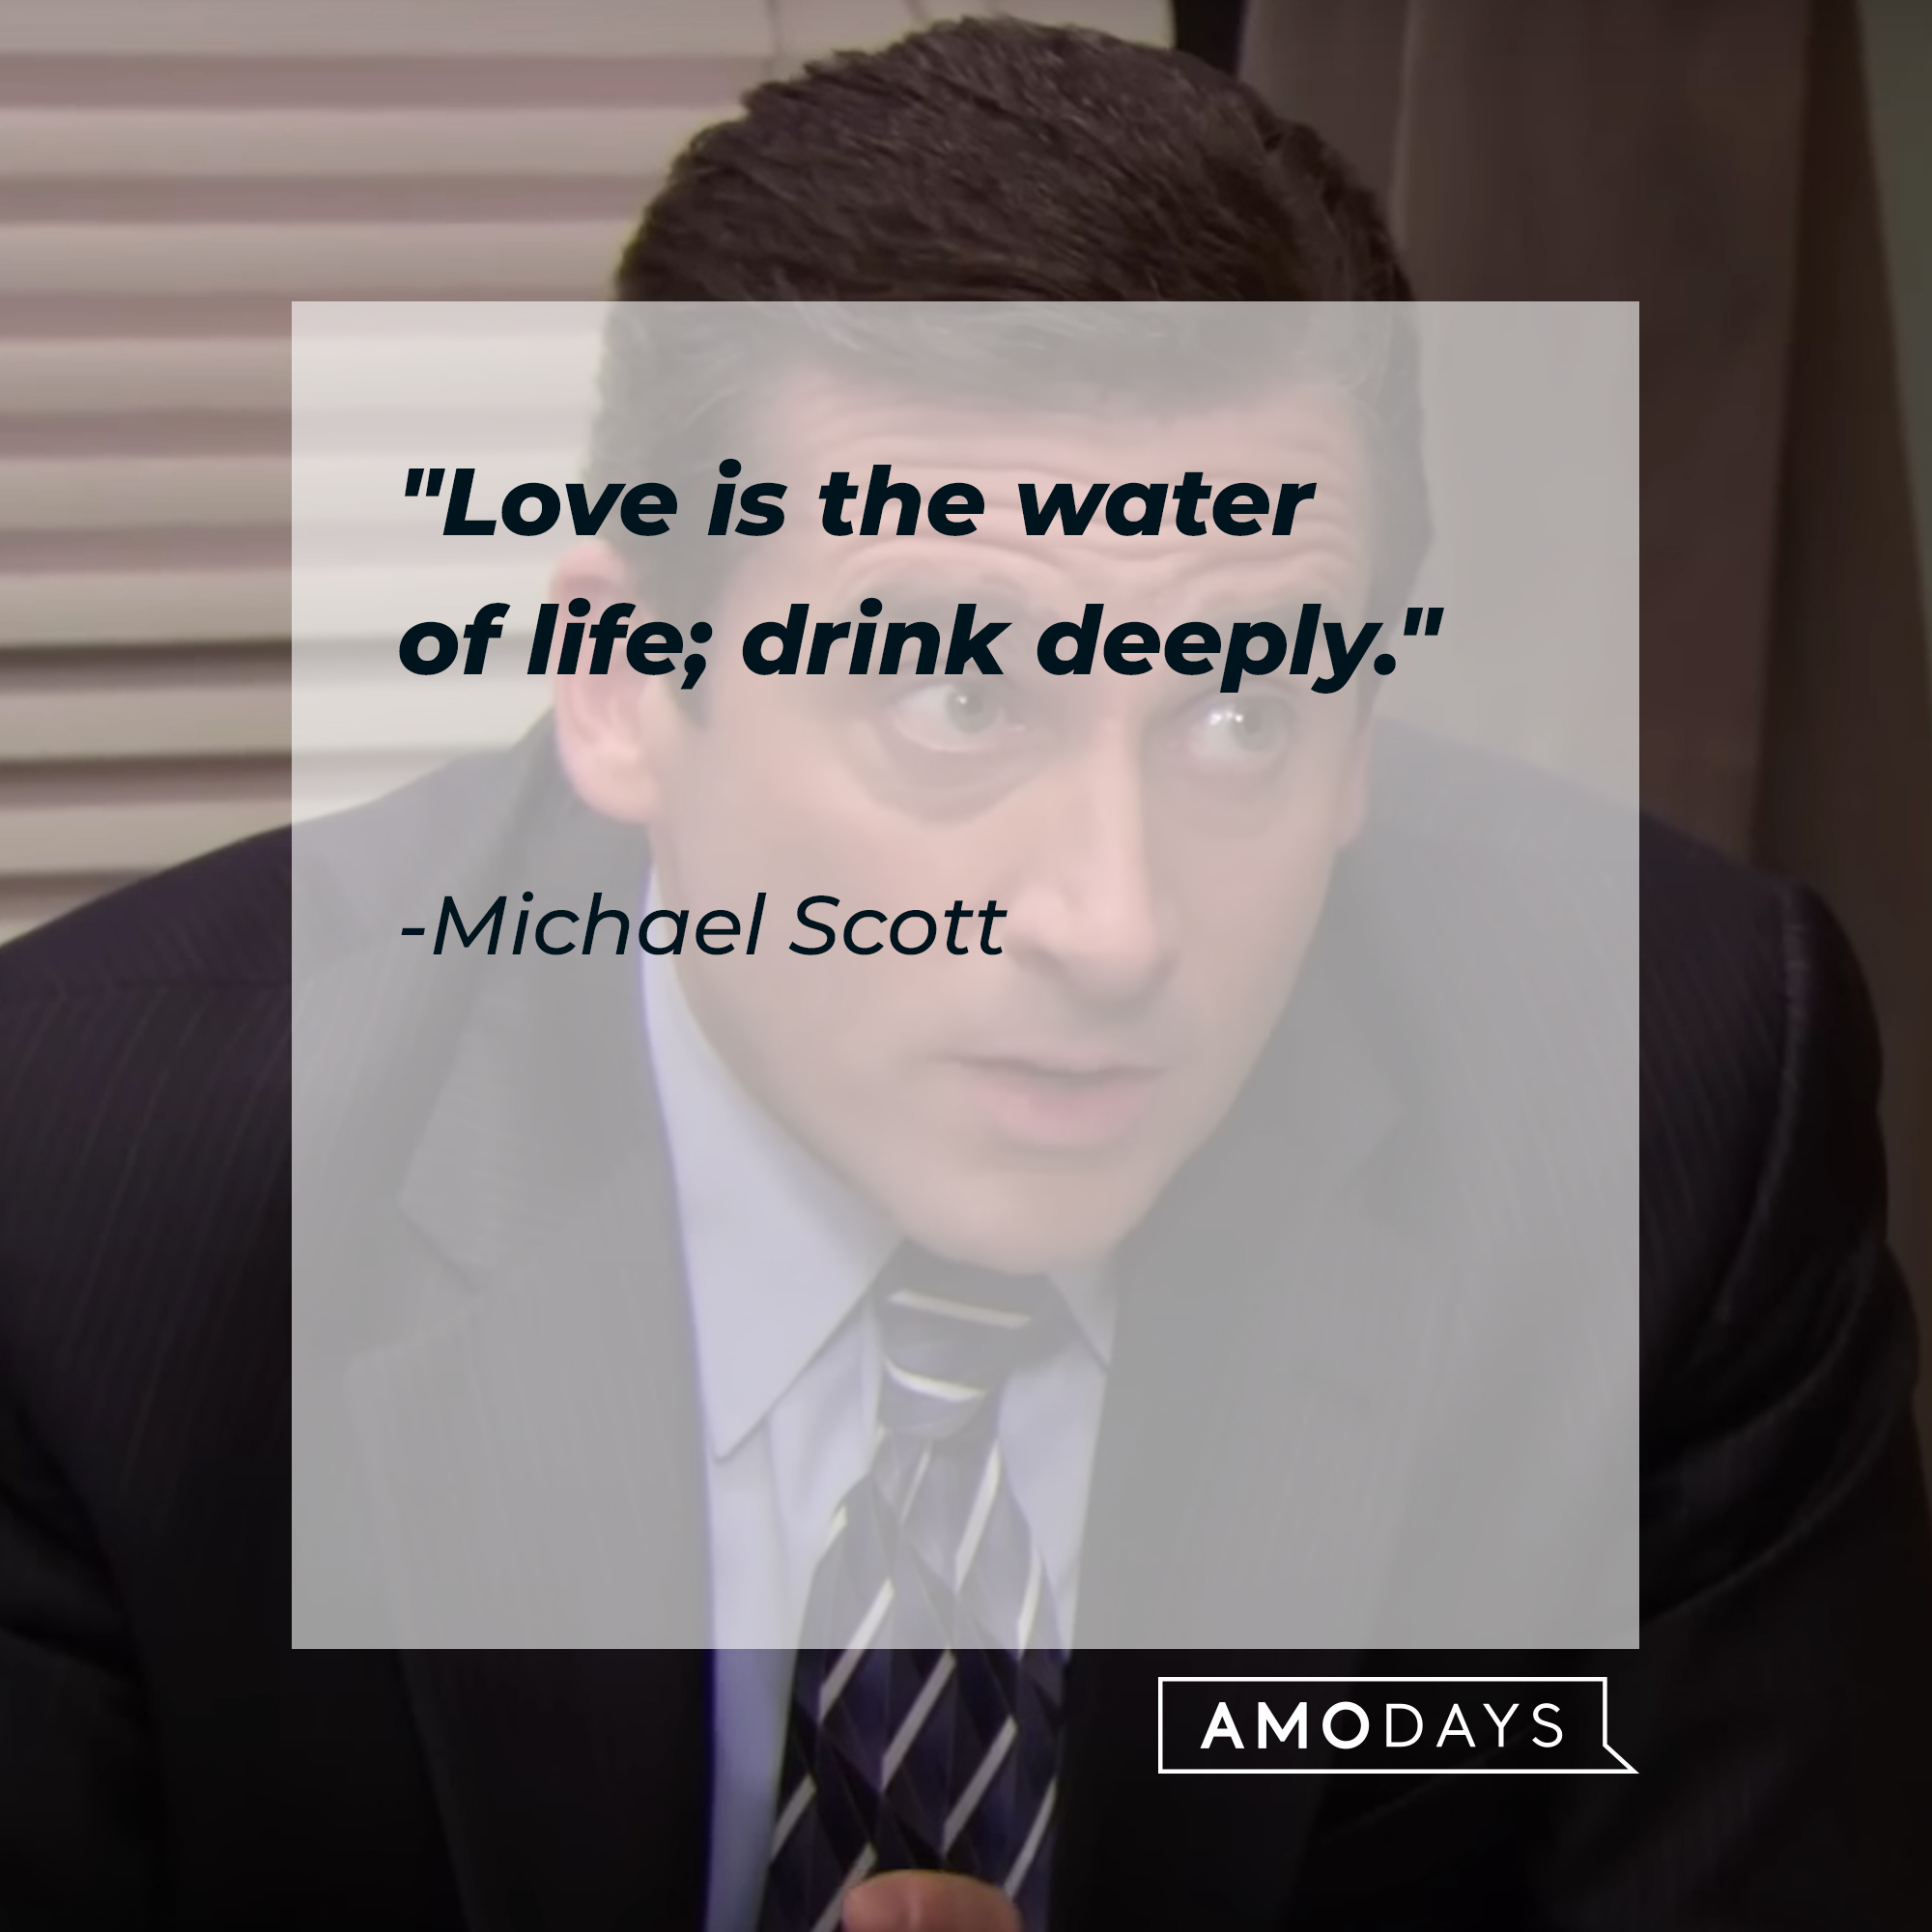 Michael Scott's quote: "Love is the water of life; drink deeply." | Source: YouTube/TheOffice